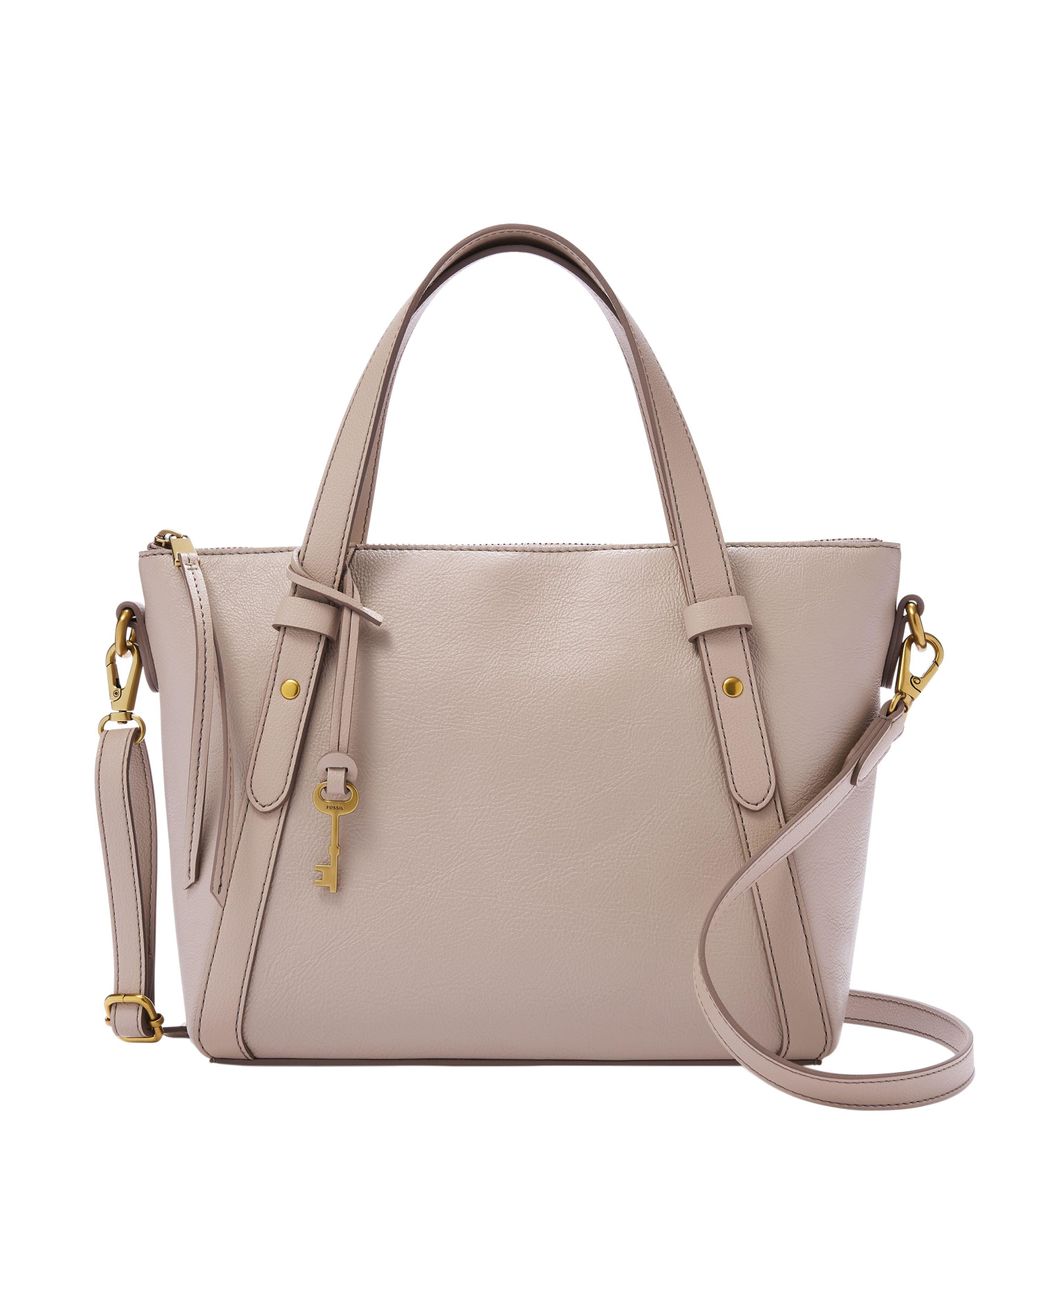 Fossil Avondale Leather Satchel in Natural | Lyst